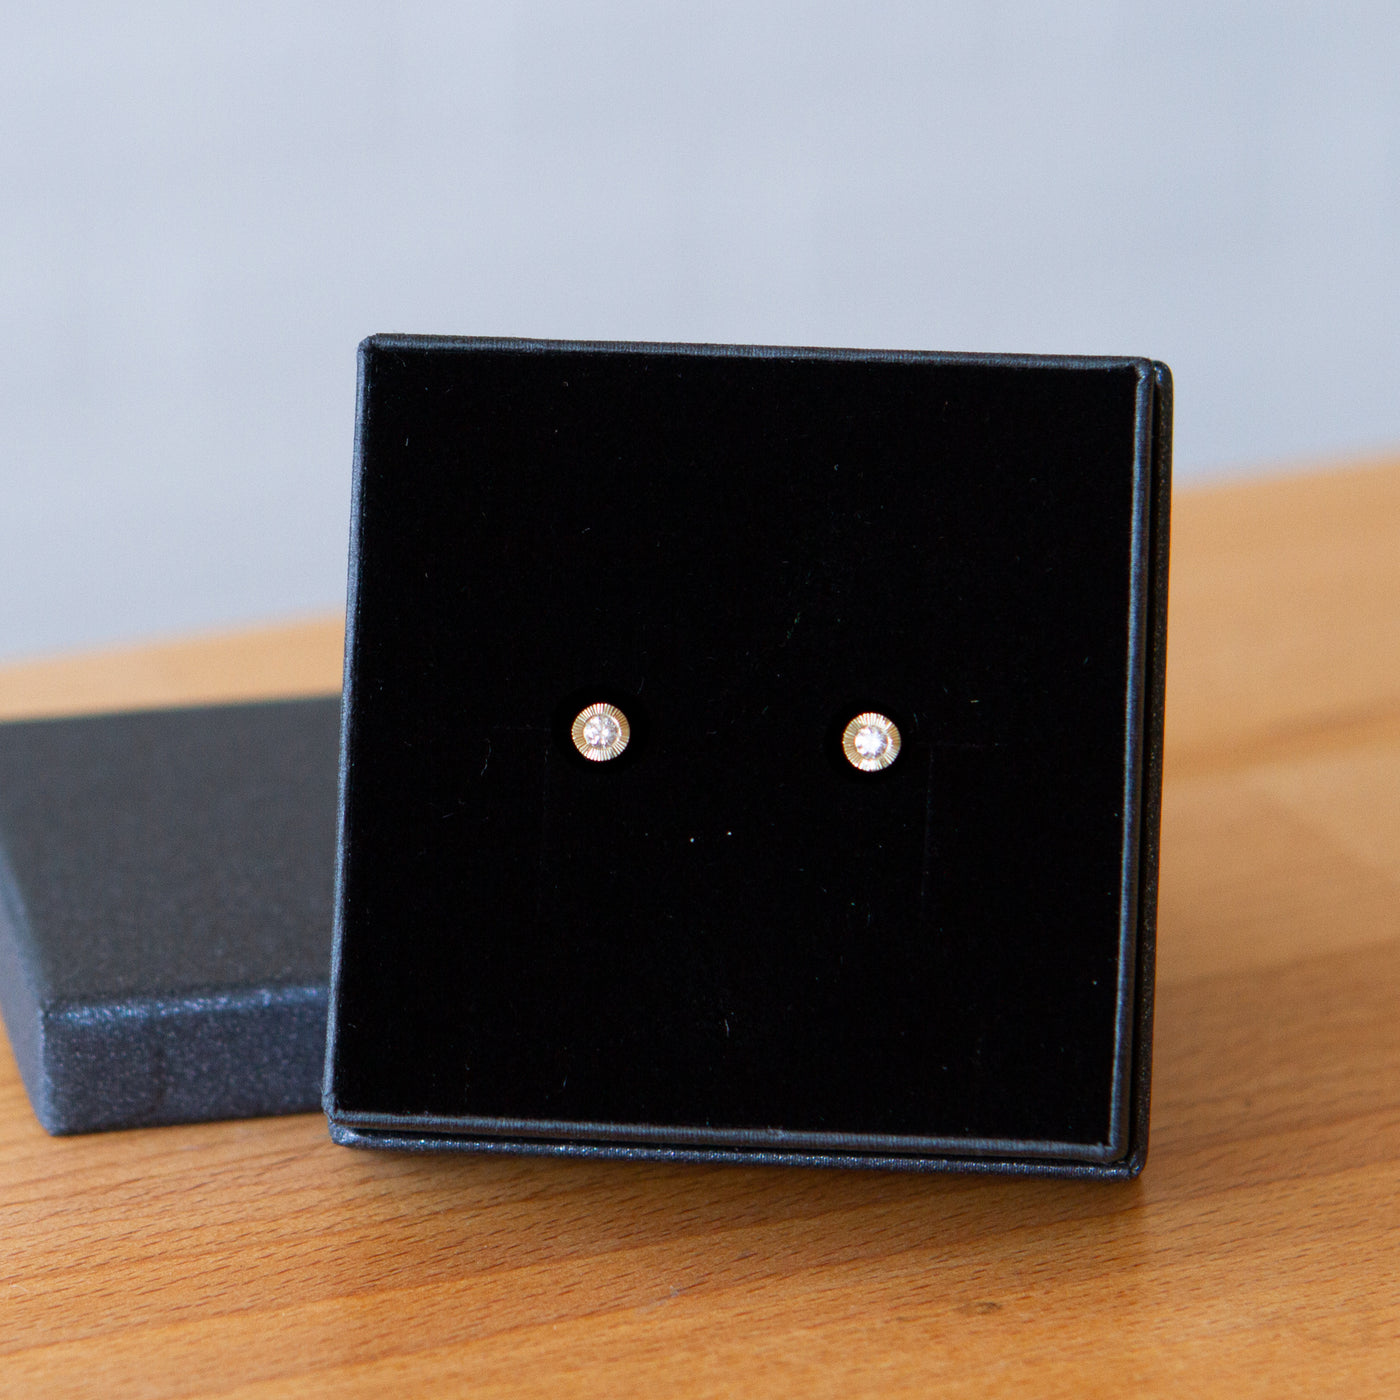 Medium Diamond Aurora stud earring in yellow gold with an engraved halo border in a gift box